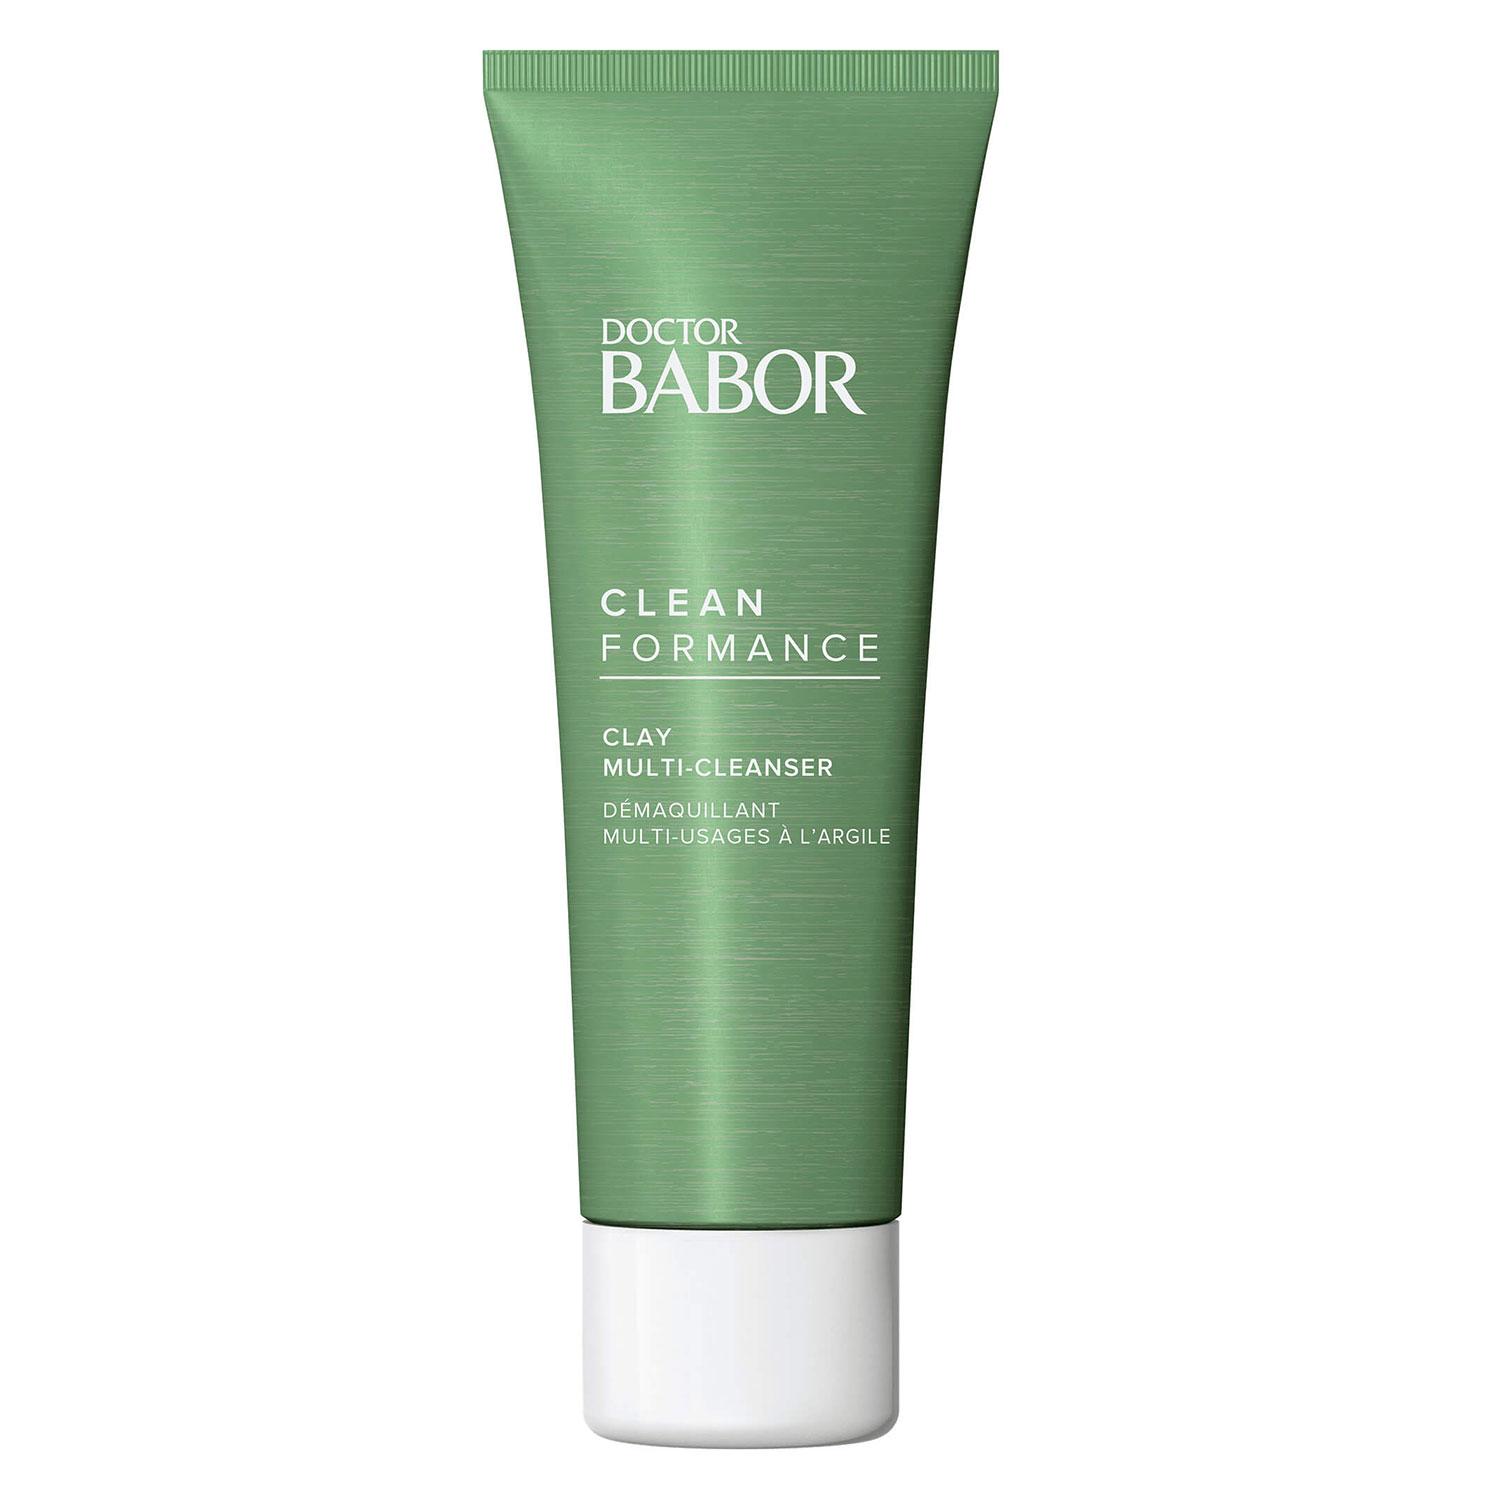 DOCTOR BABOR - Clay Multi-Cleanser